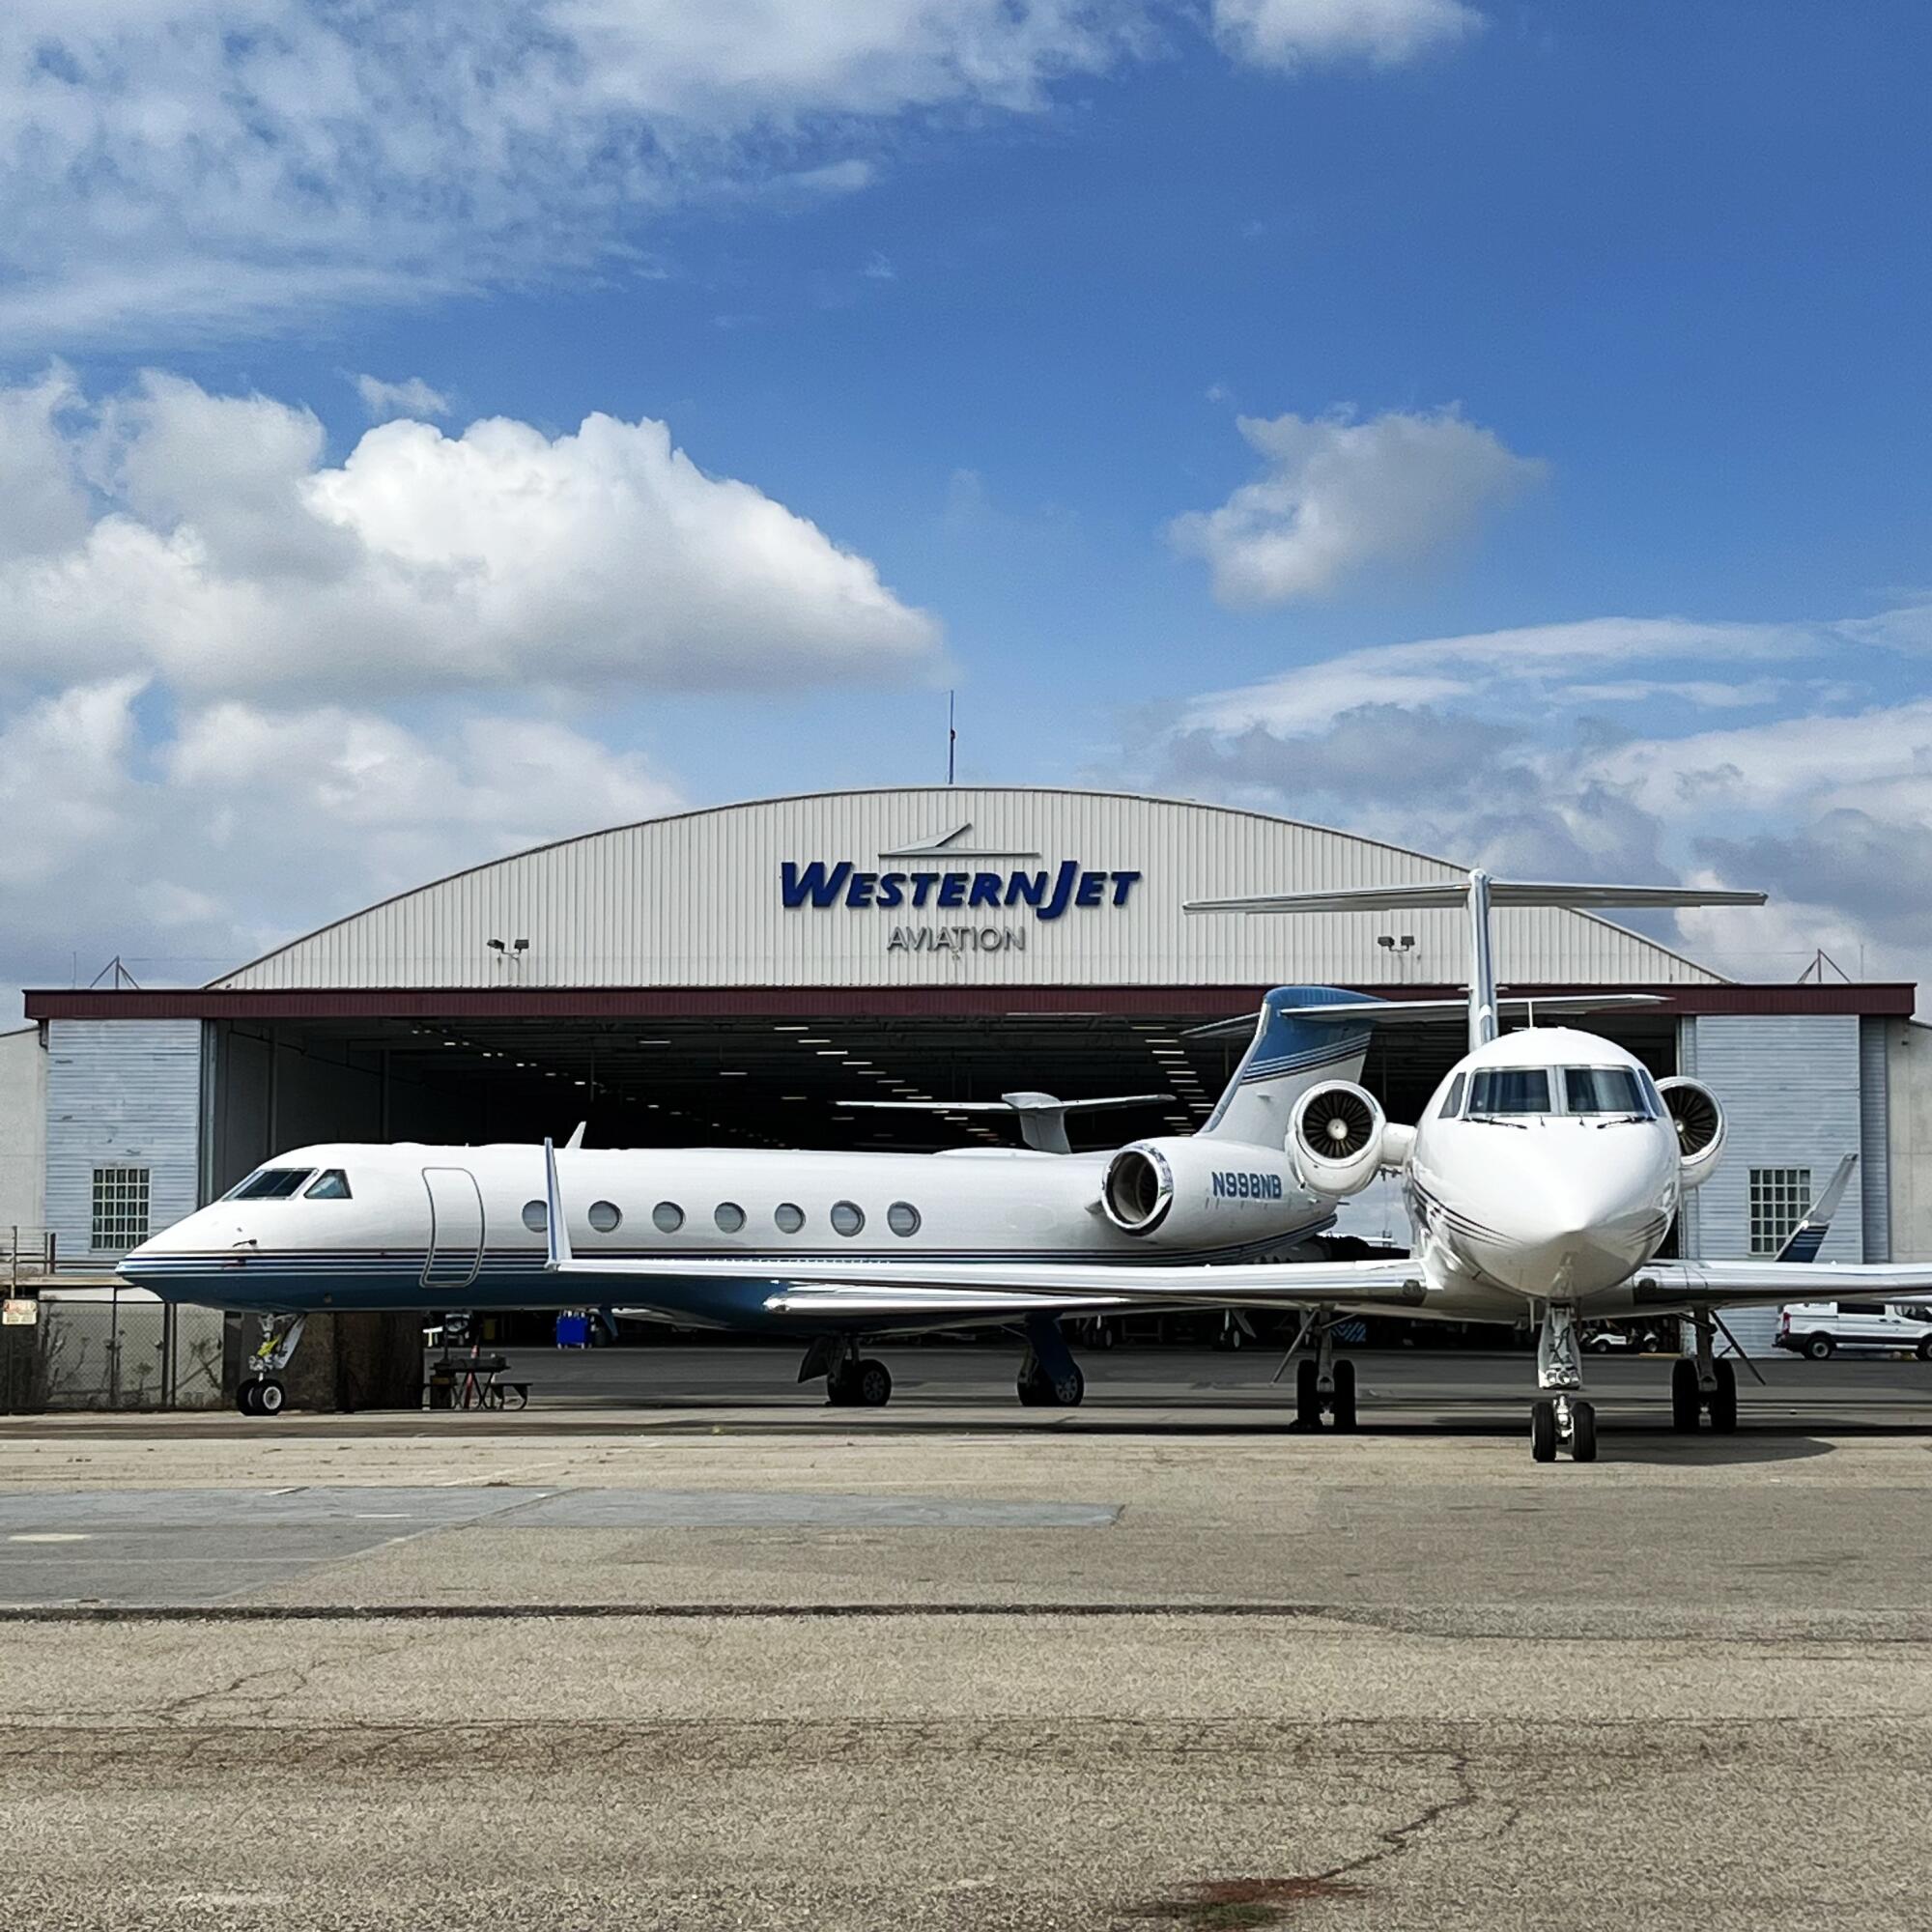 Two private jets are seen in front of the Western Jet hangar at Van Nuys Airport.